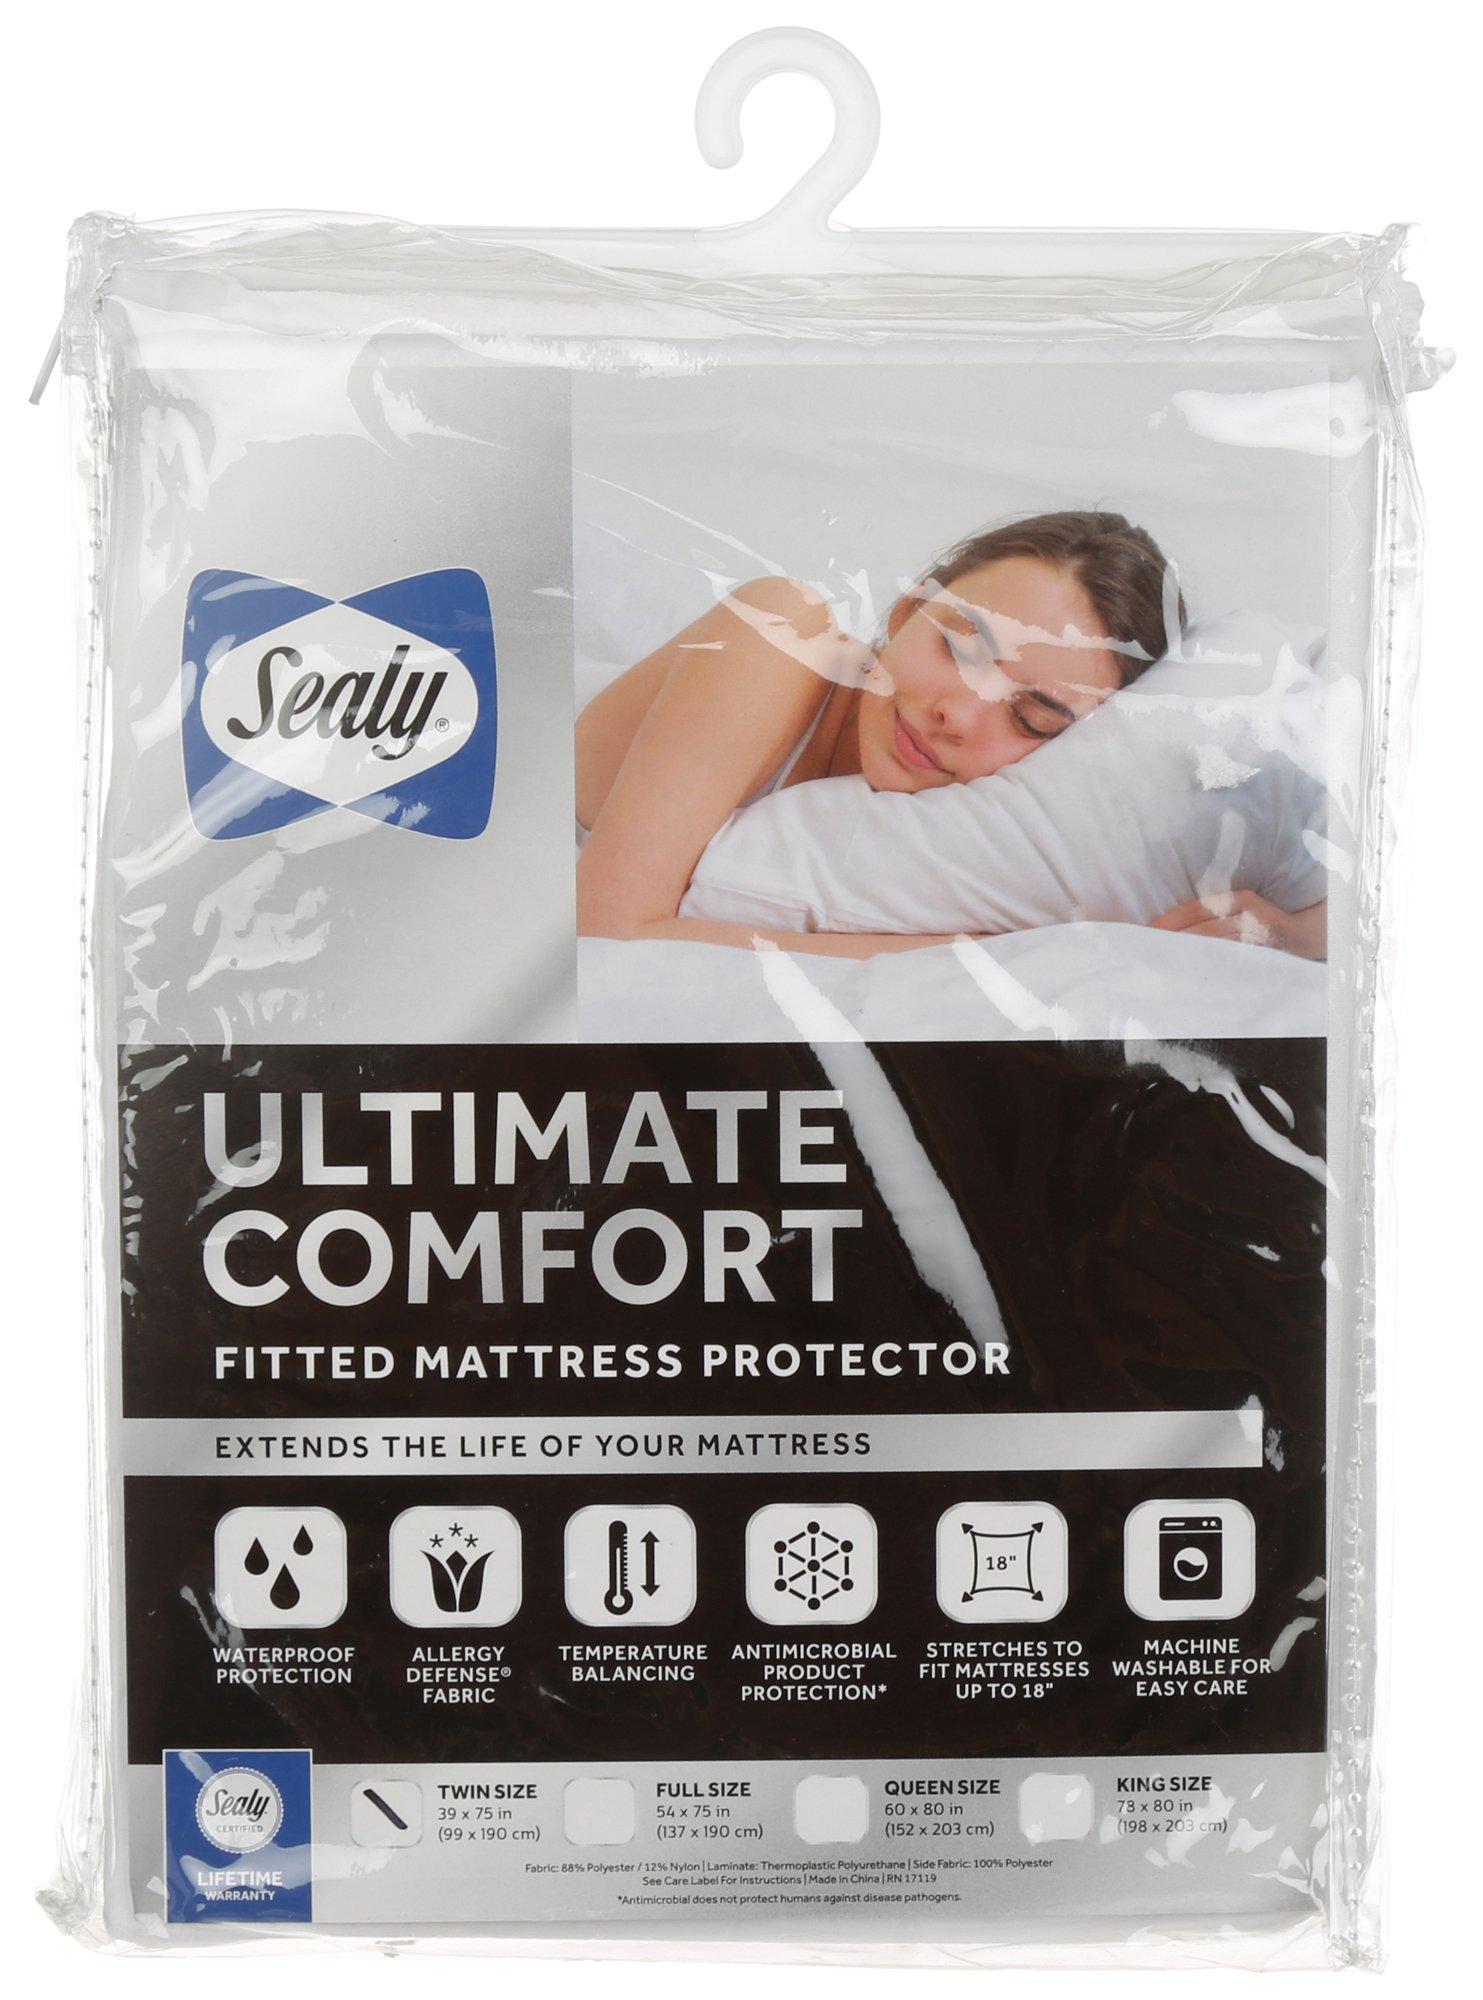 Ultimate Comfort Fitted Mattress Protector